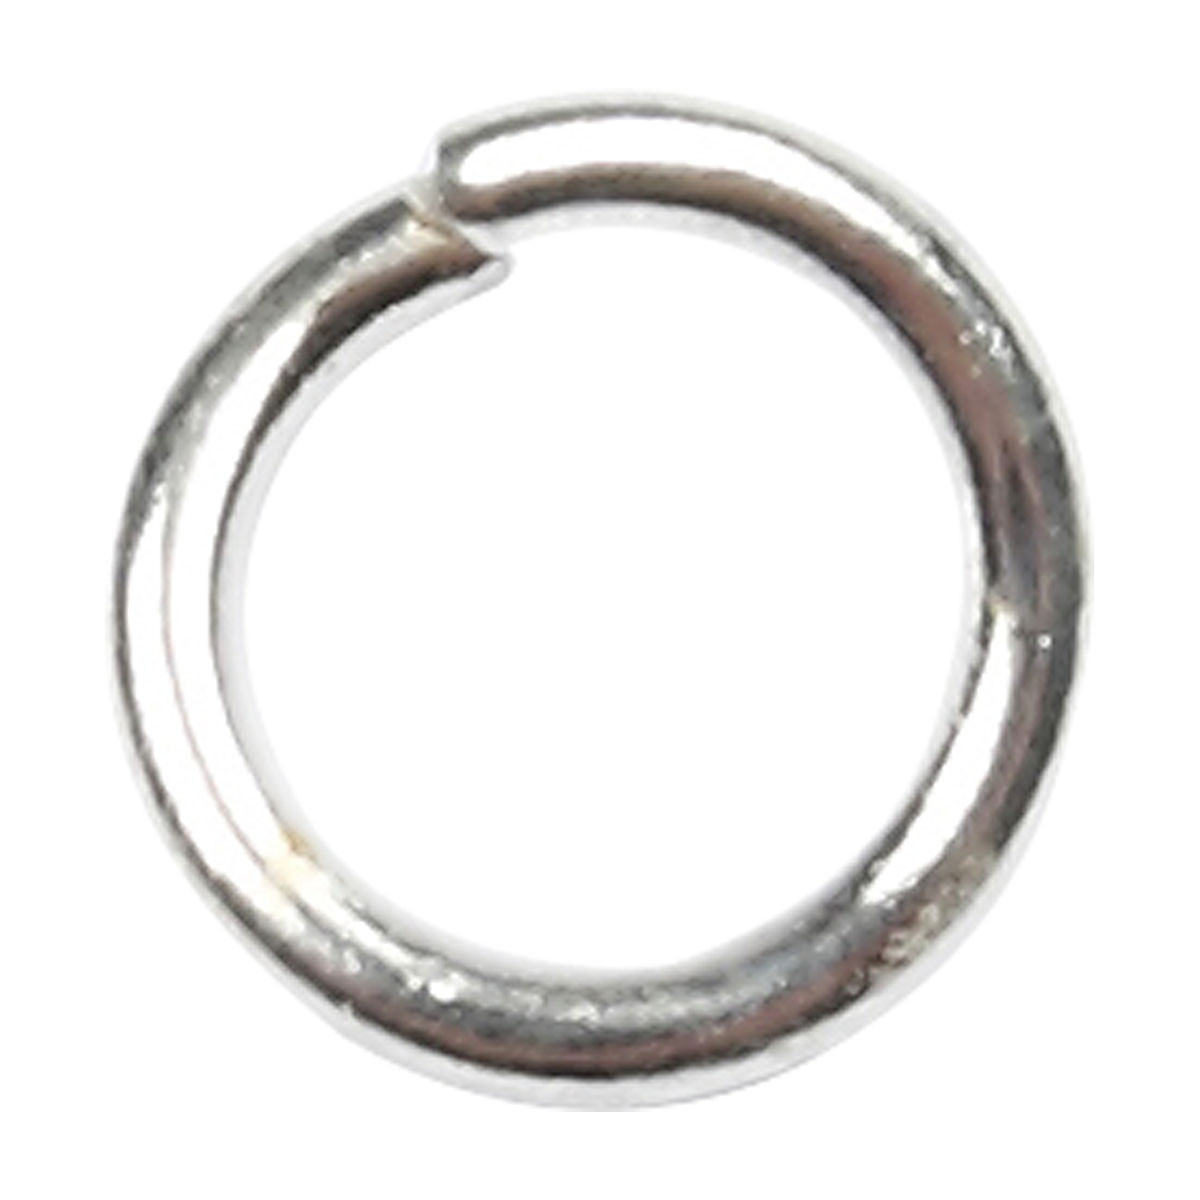 Jump Ring, thickness 0.7 mm, inner size 3 mm, 500 pcs, silverplated